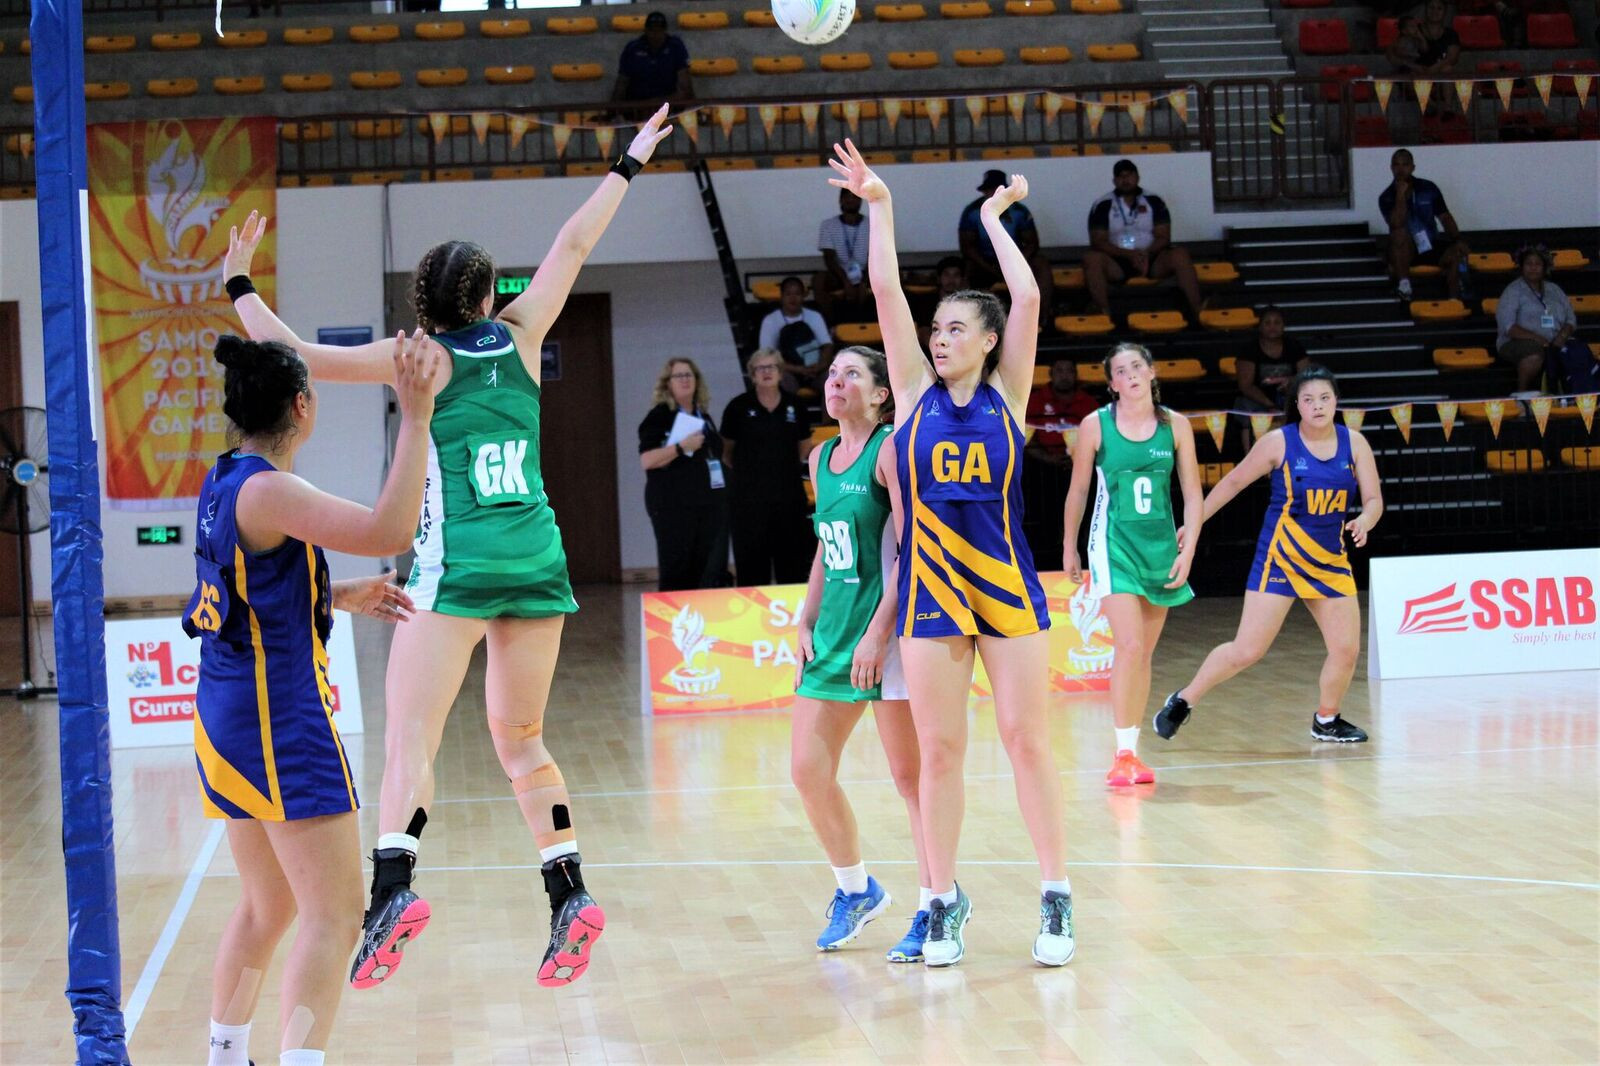 The minnows of Tokelau and Norfolk Islands faced off in the netball at the Multi-Sport Centre ©Games News Service